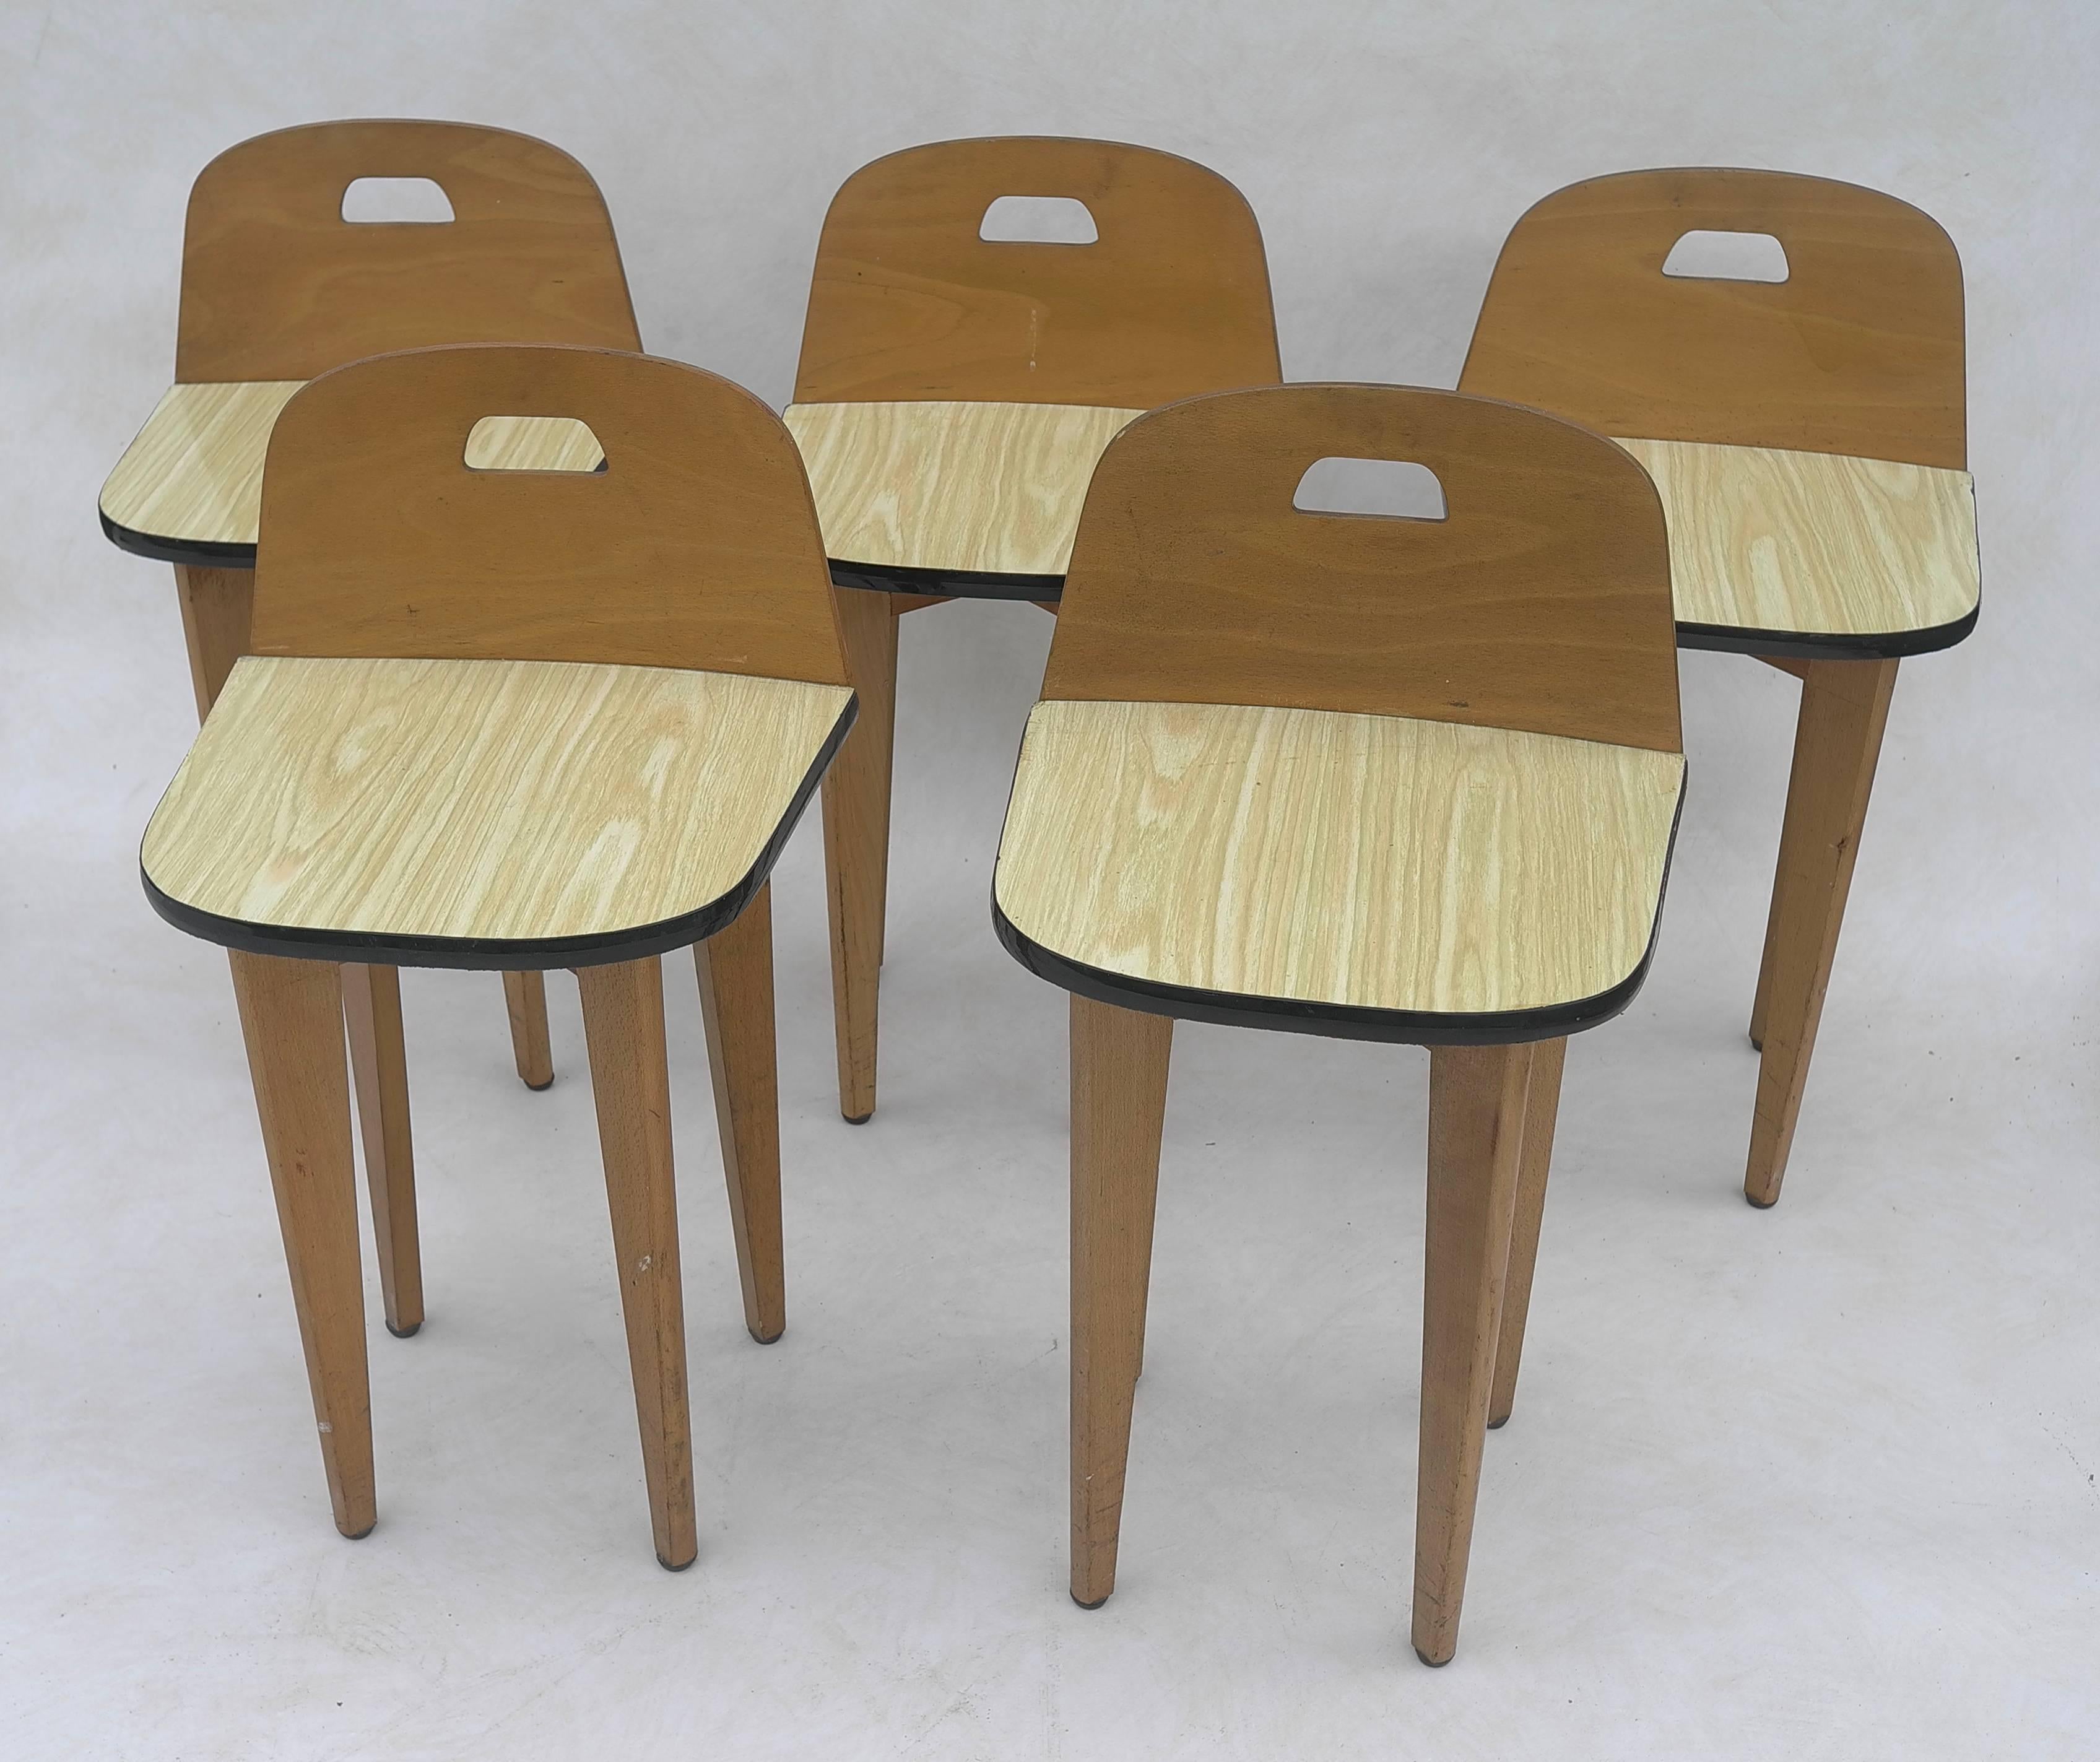 Five birchwood stools with Formica seat, France, 1950s.